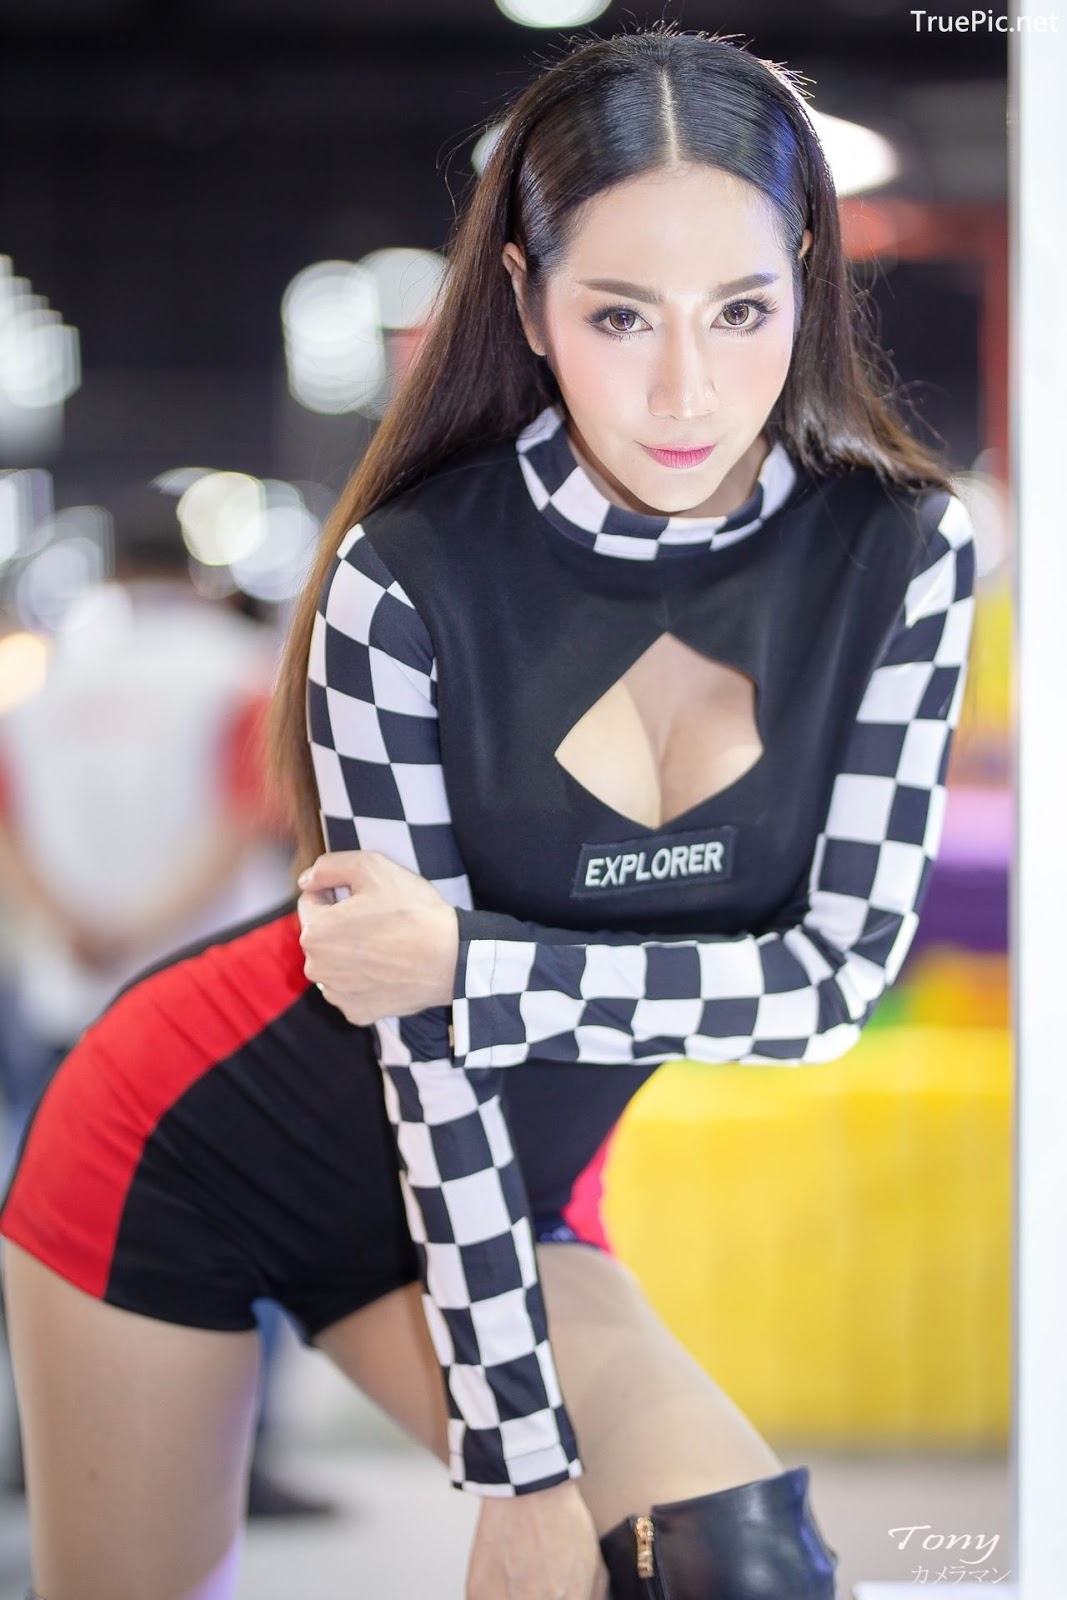 Image-Thailand-Hot-Model-Thai-Racing-Girl-At-Motor-Expo-2019-TruePic.net- Picture-34